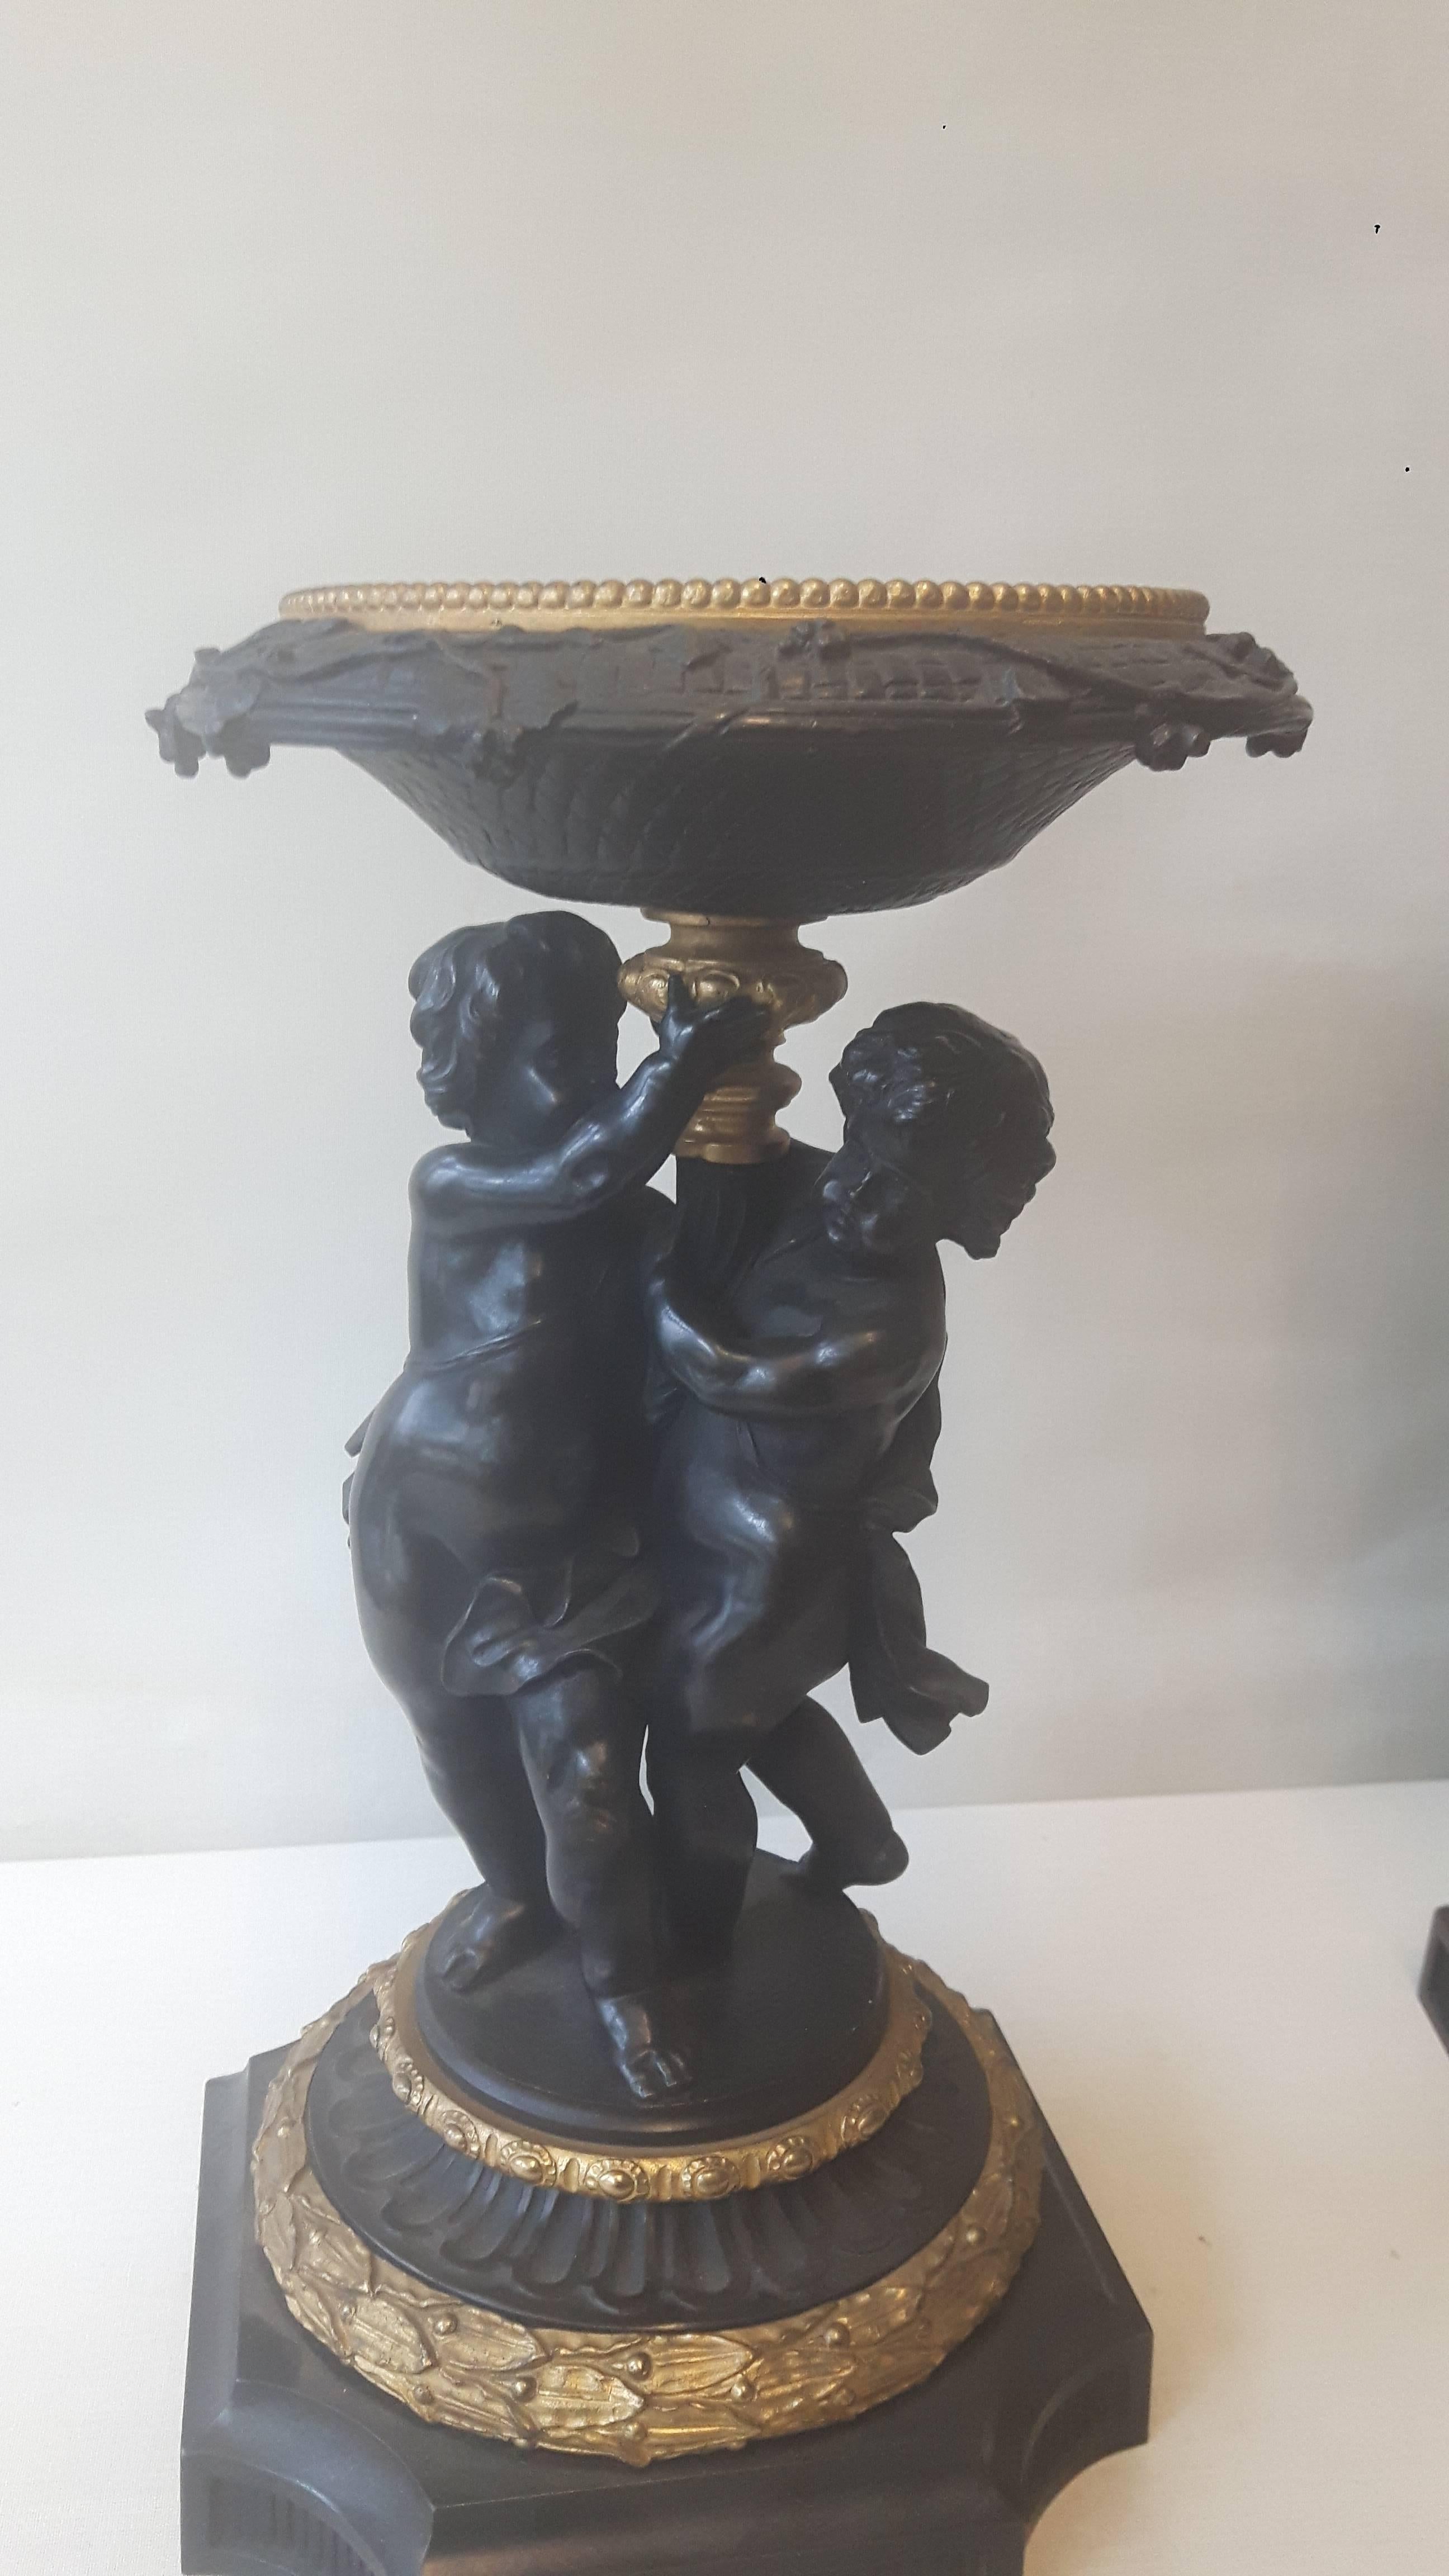 A pair of bronze and ormolu tazzas in the C17 Italian style, each tazza engraved with mythological scenes, held up by a column and two putti, in the 